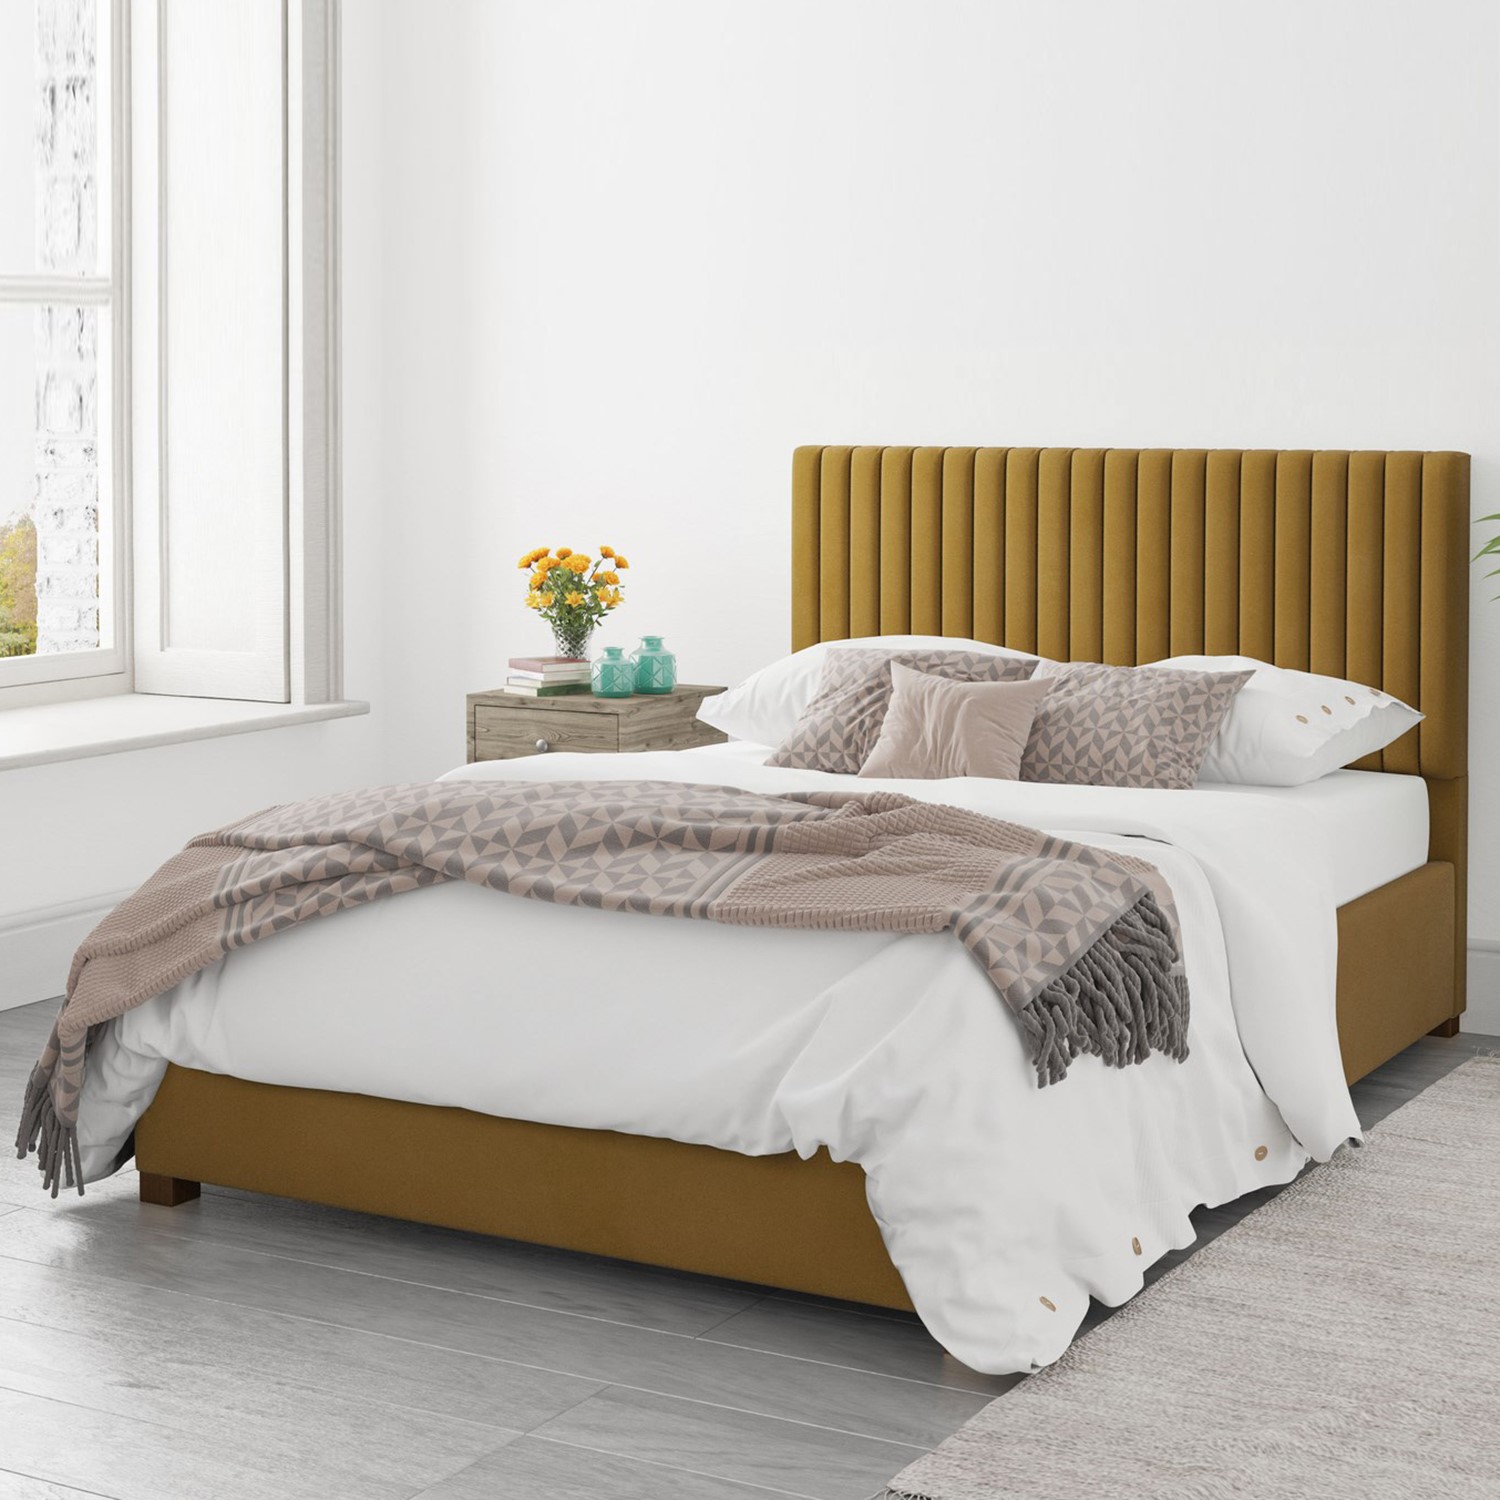 Read more about Mustard velvet double ottoman bed piccadilly aspire